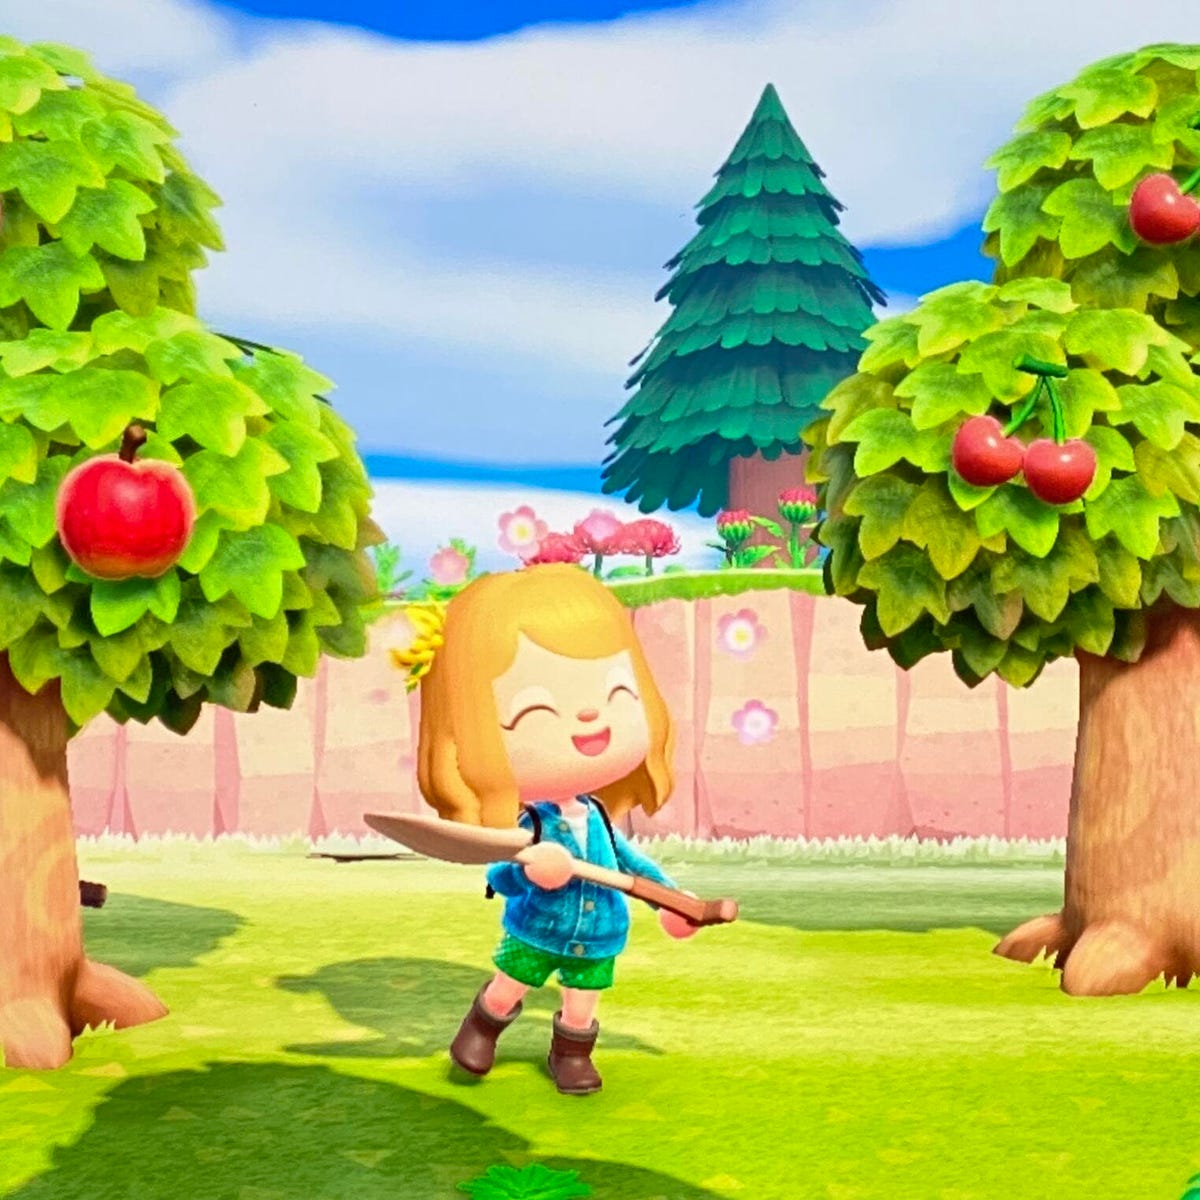 More games to play with your friends in Animal Crossing: New Horizons - CNET